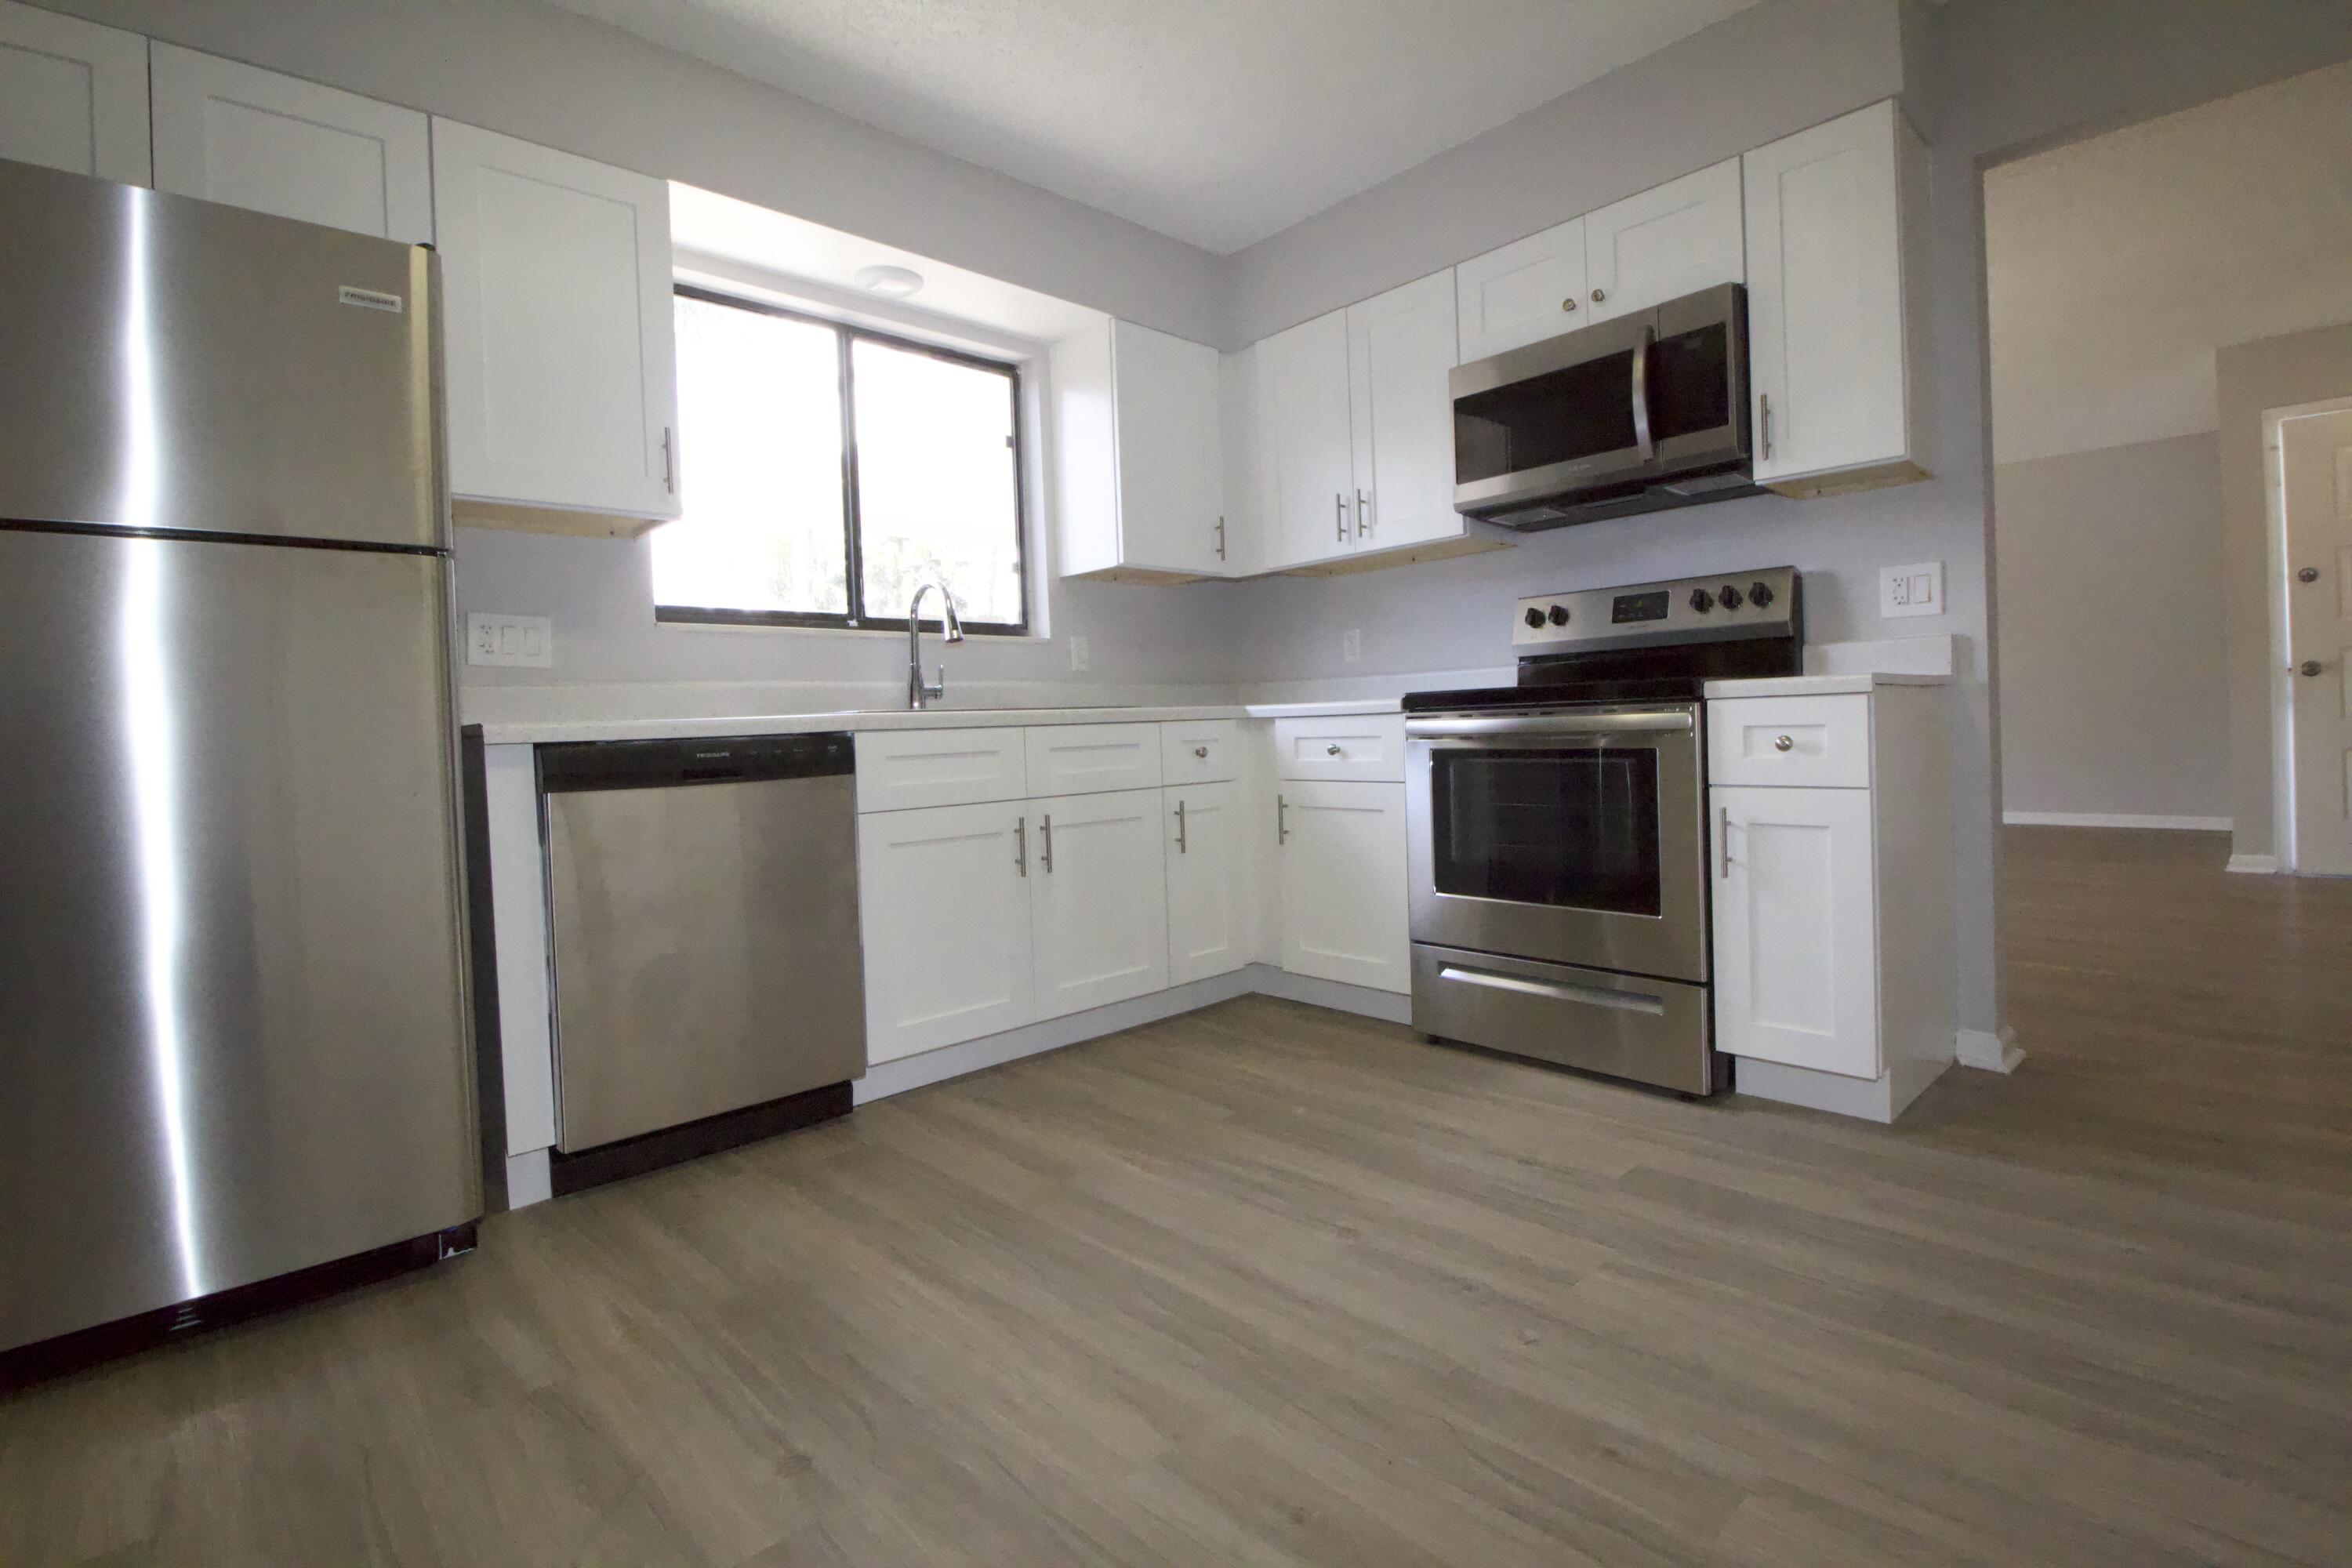 a kitchen with stainless steel appliances a refrigerator microwave stove sink and cabinets